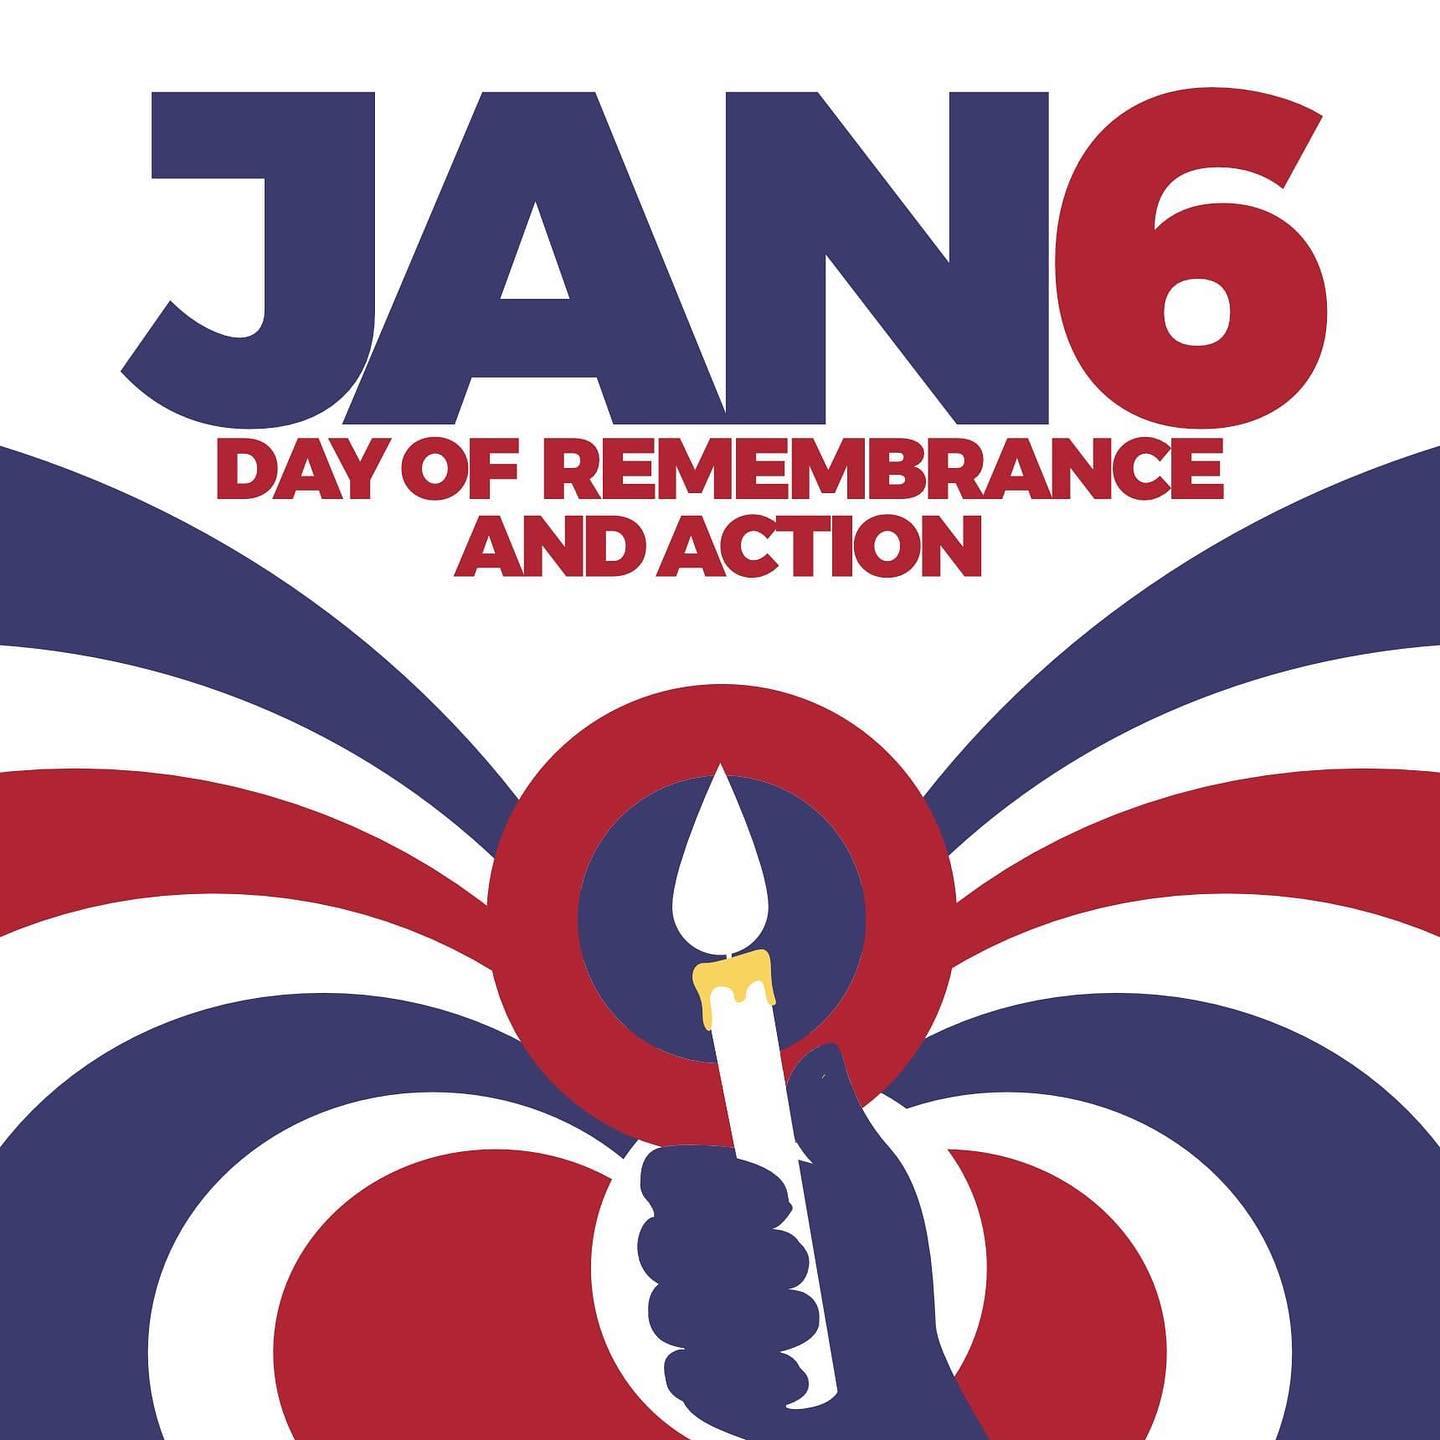 Text reads: Jan6 Day of remembrance and action. Graphic is curved red, white and blue stripes with a hand holding a lit candle in the center.